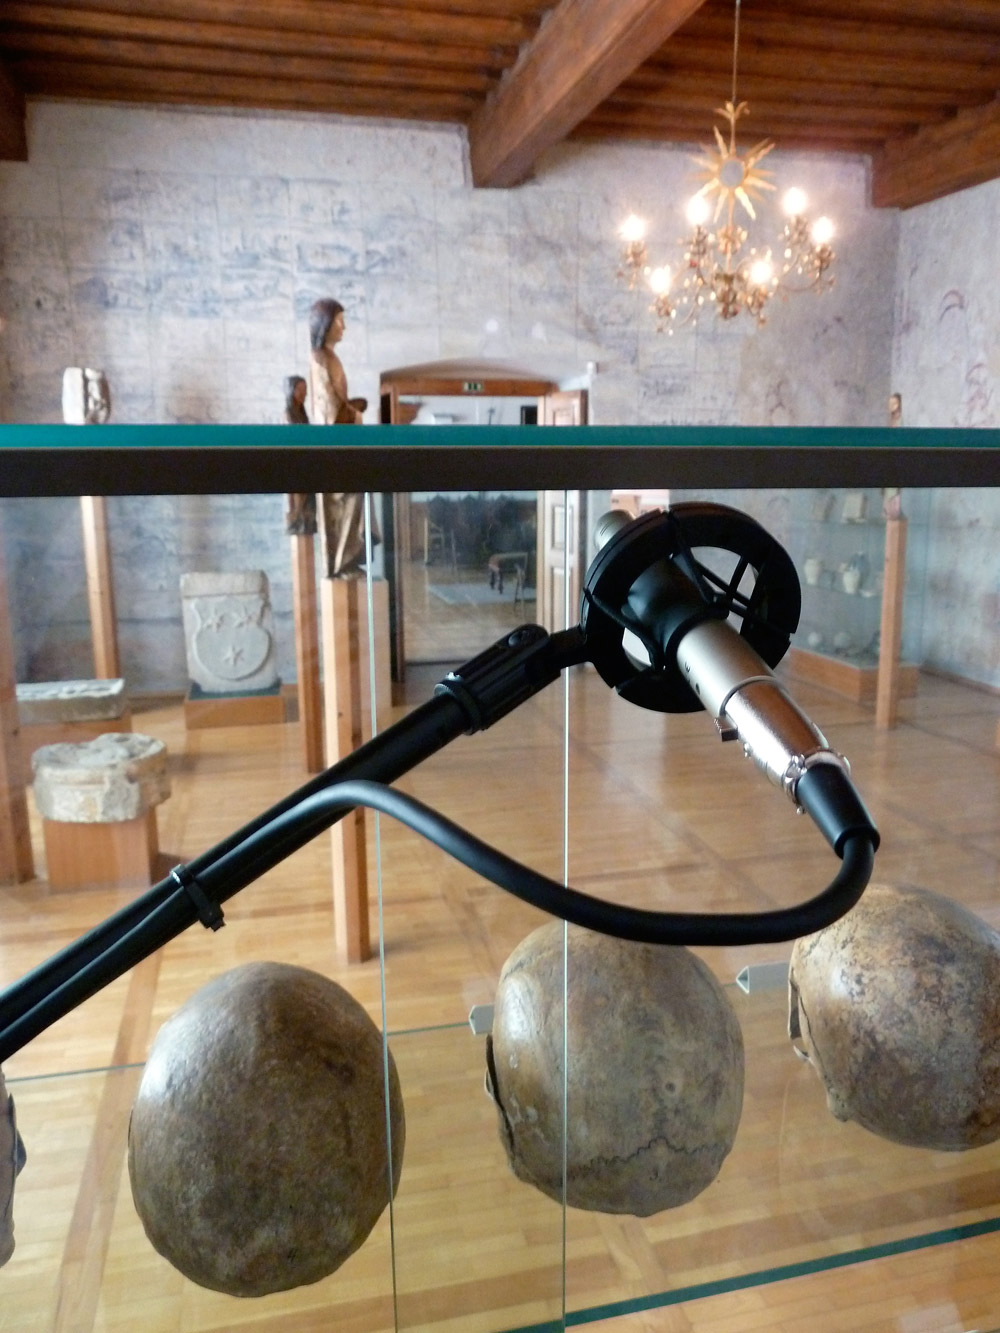 Art, artwork. An interactive sound installation entitled "Play Misty for Me" by Nika Span / Nika Špan. Material: A microphone, a tripod, a sound mixer, and an active loudspeaker. Exhibition: Narratives in Progress, Regional museum, Celje, Slovenia.